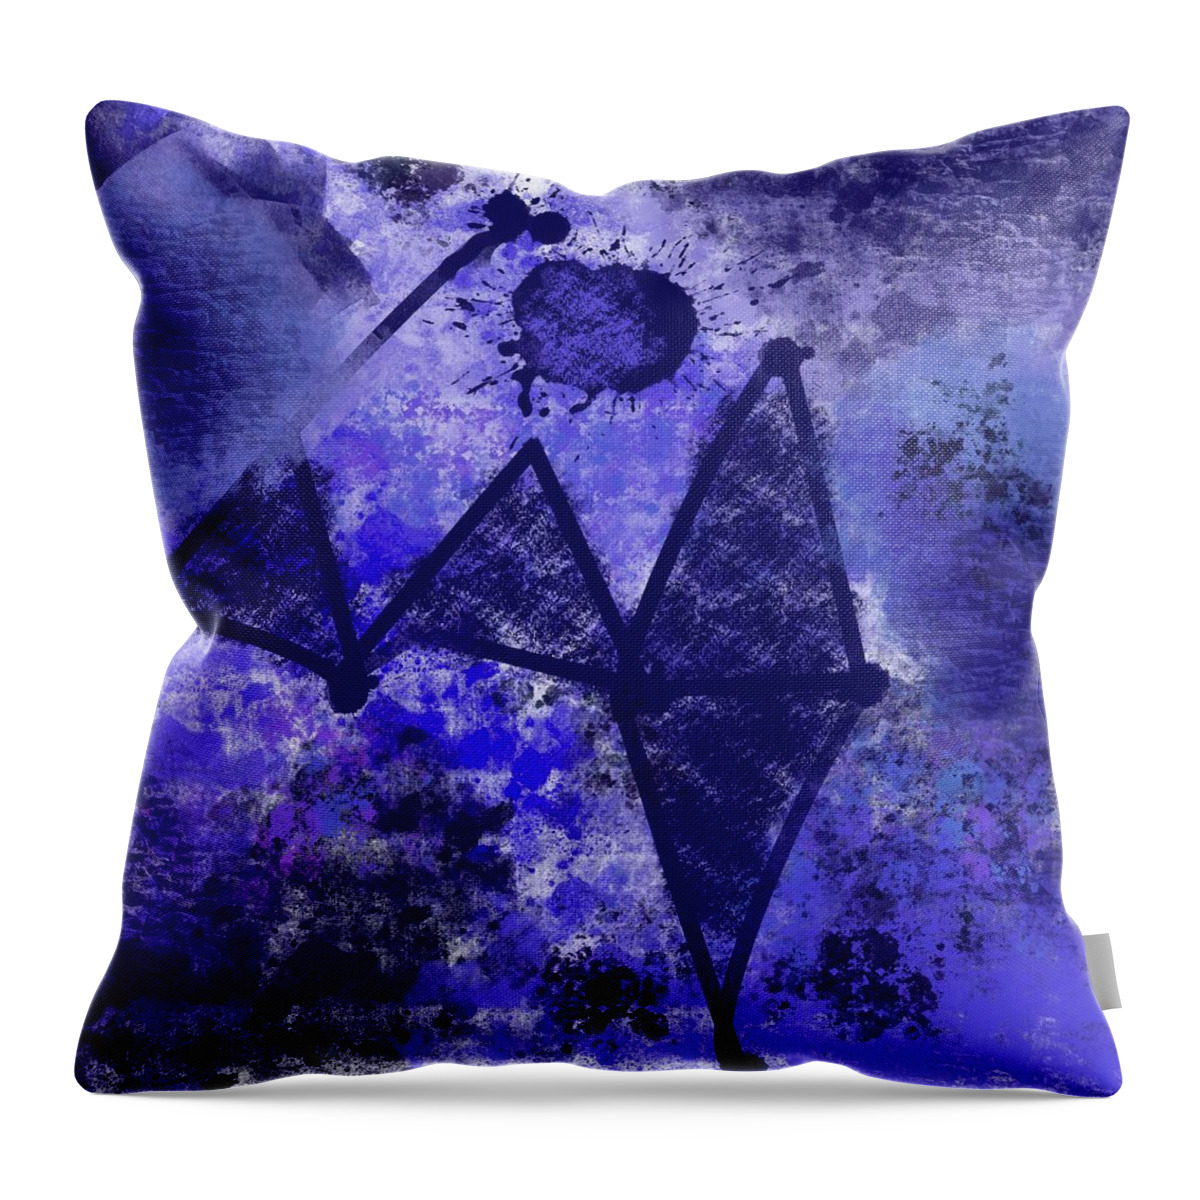 Lost Hypotenuse Throw Pillow featuring the digital art Lost Hypotenuse by Ruth Harrigan